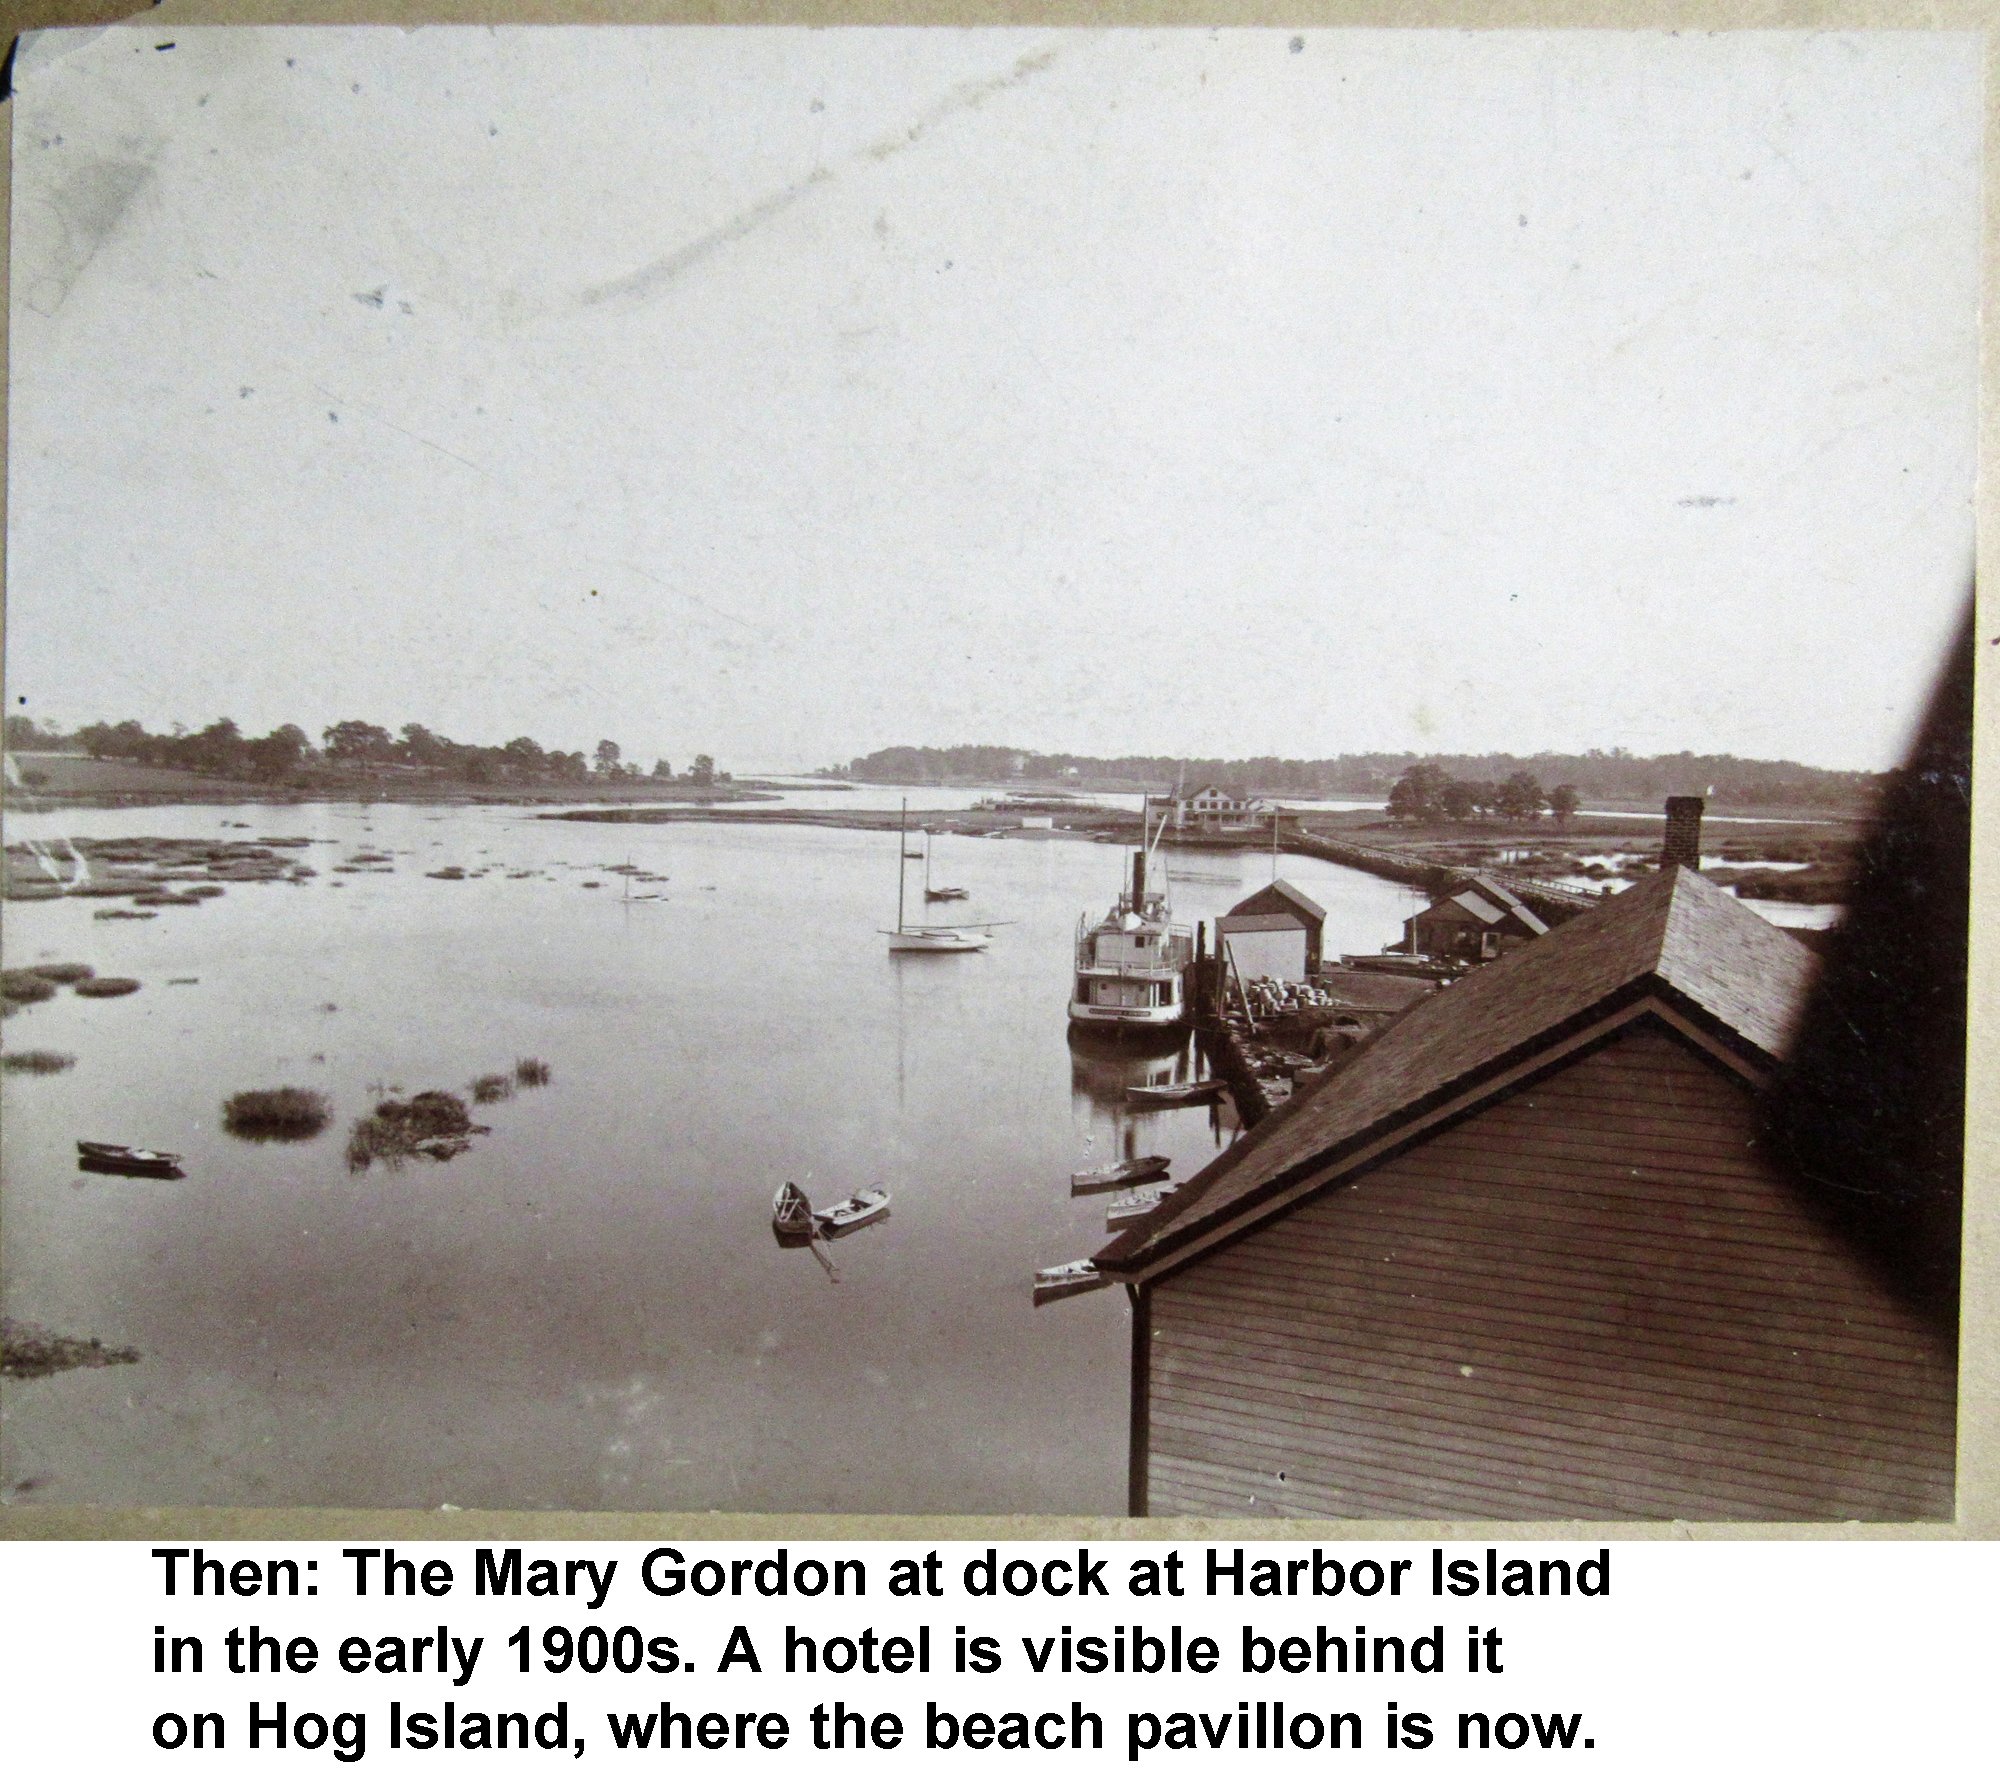 WD-13-B The Mary Gordon at Dock Harbor Island early 1900s Hotel visible behind it on Hog Island captioned.jpg